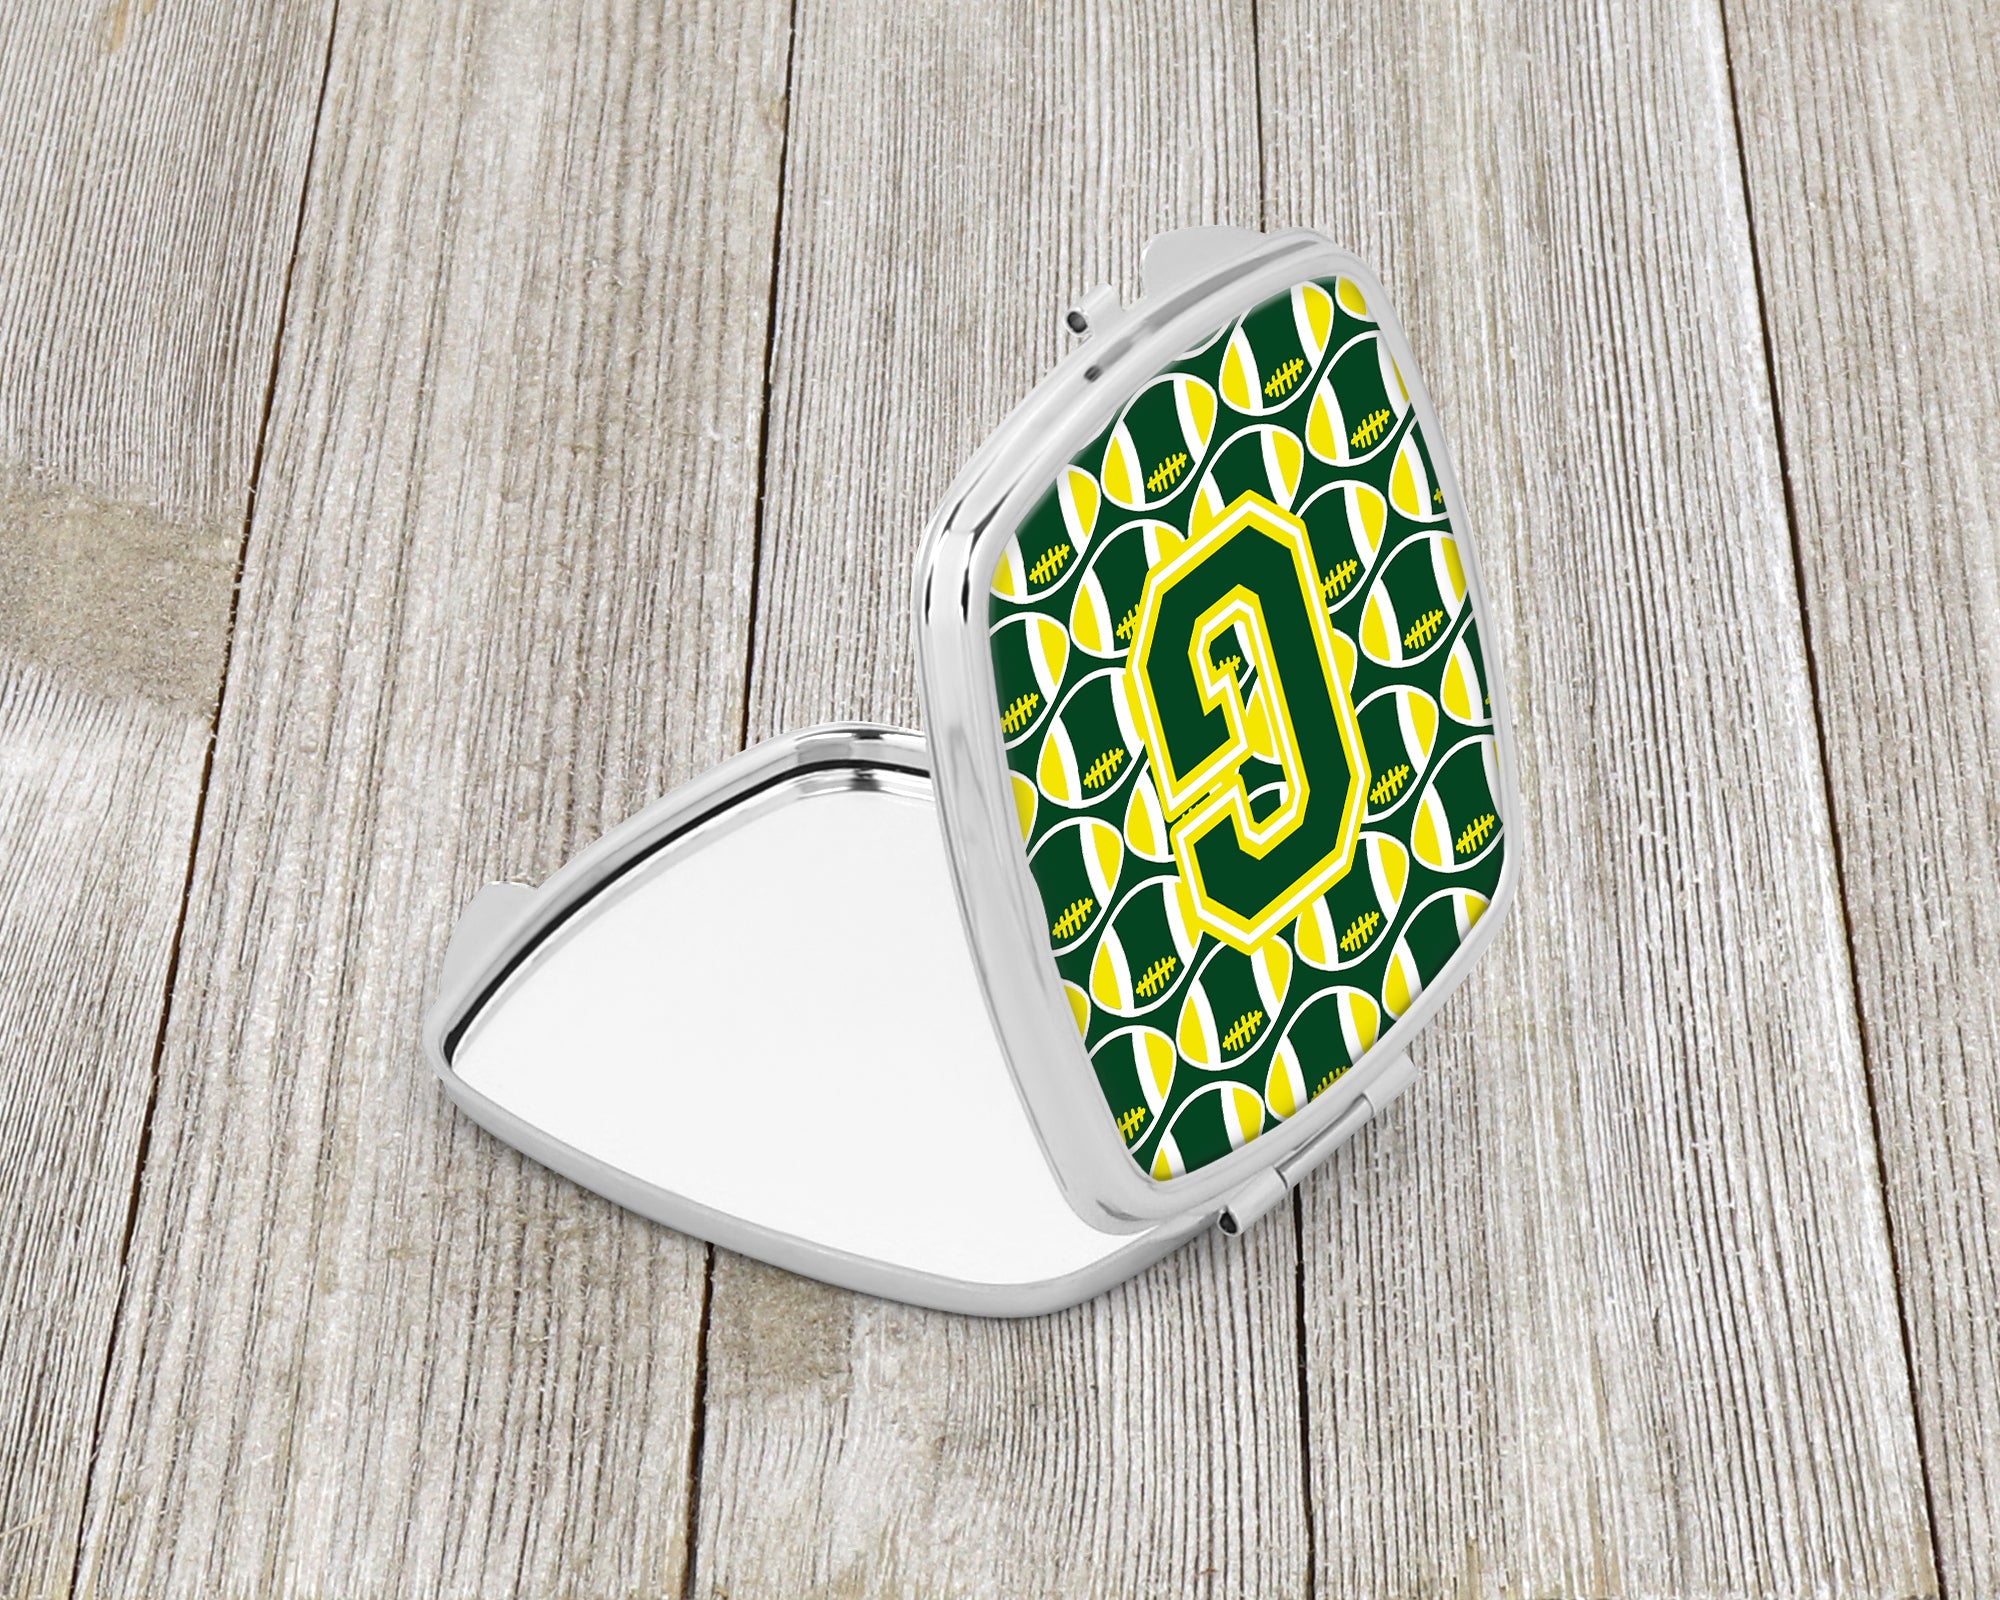 Letter G Football Green and Yellow Compact Mirror CJ1075-GSCM  the-store.com.